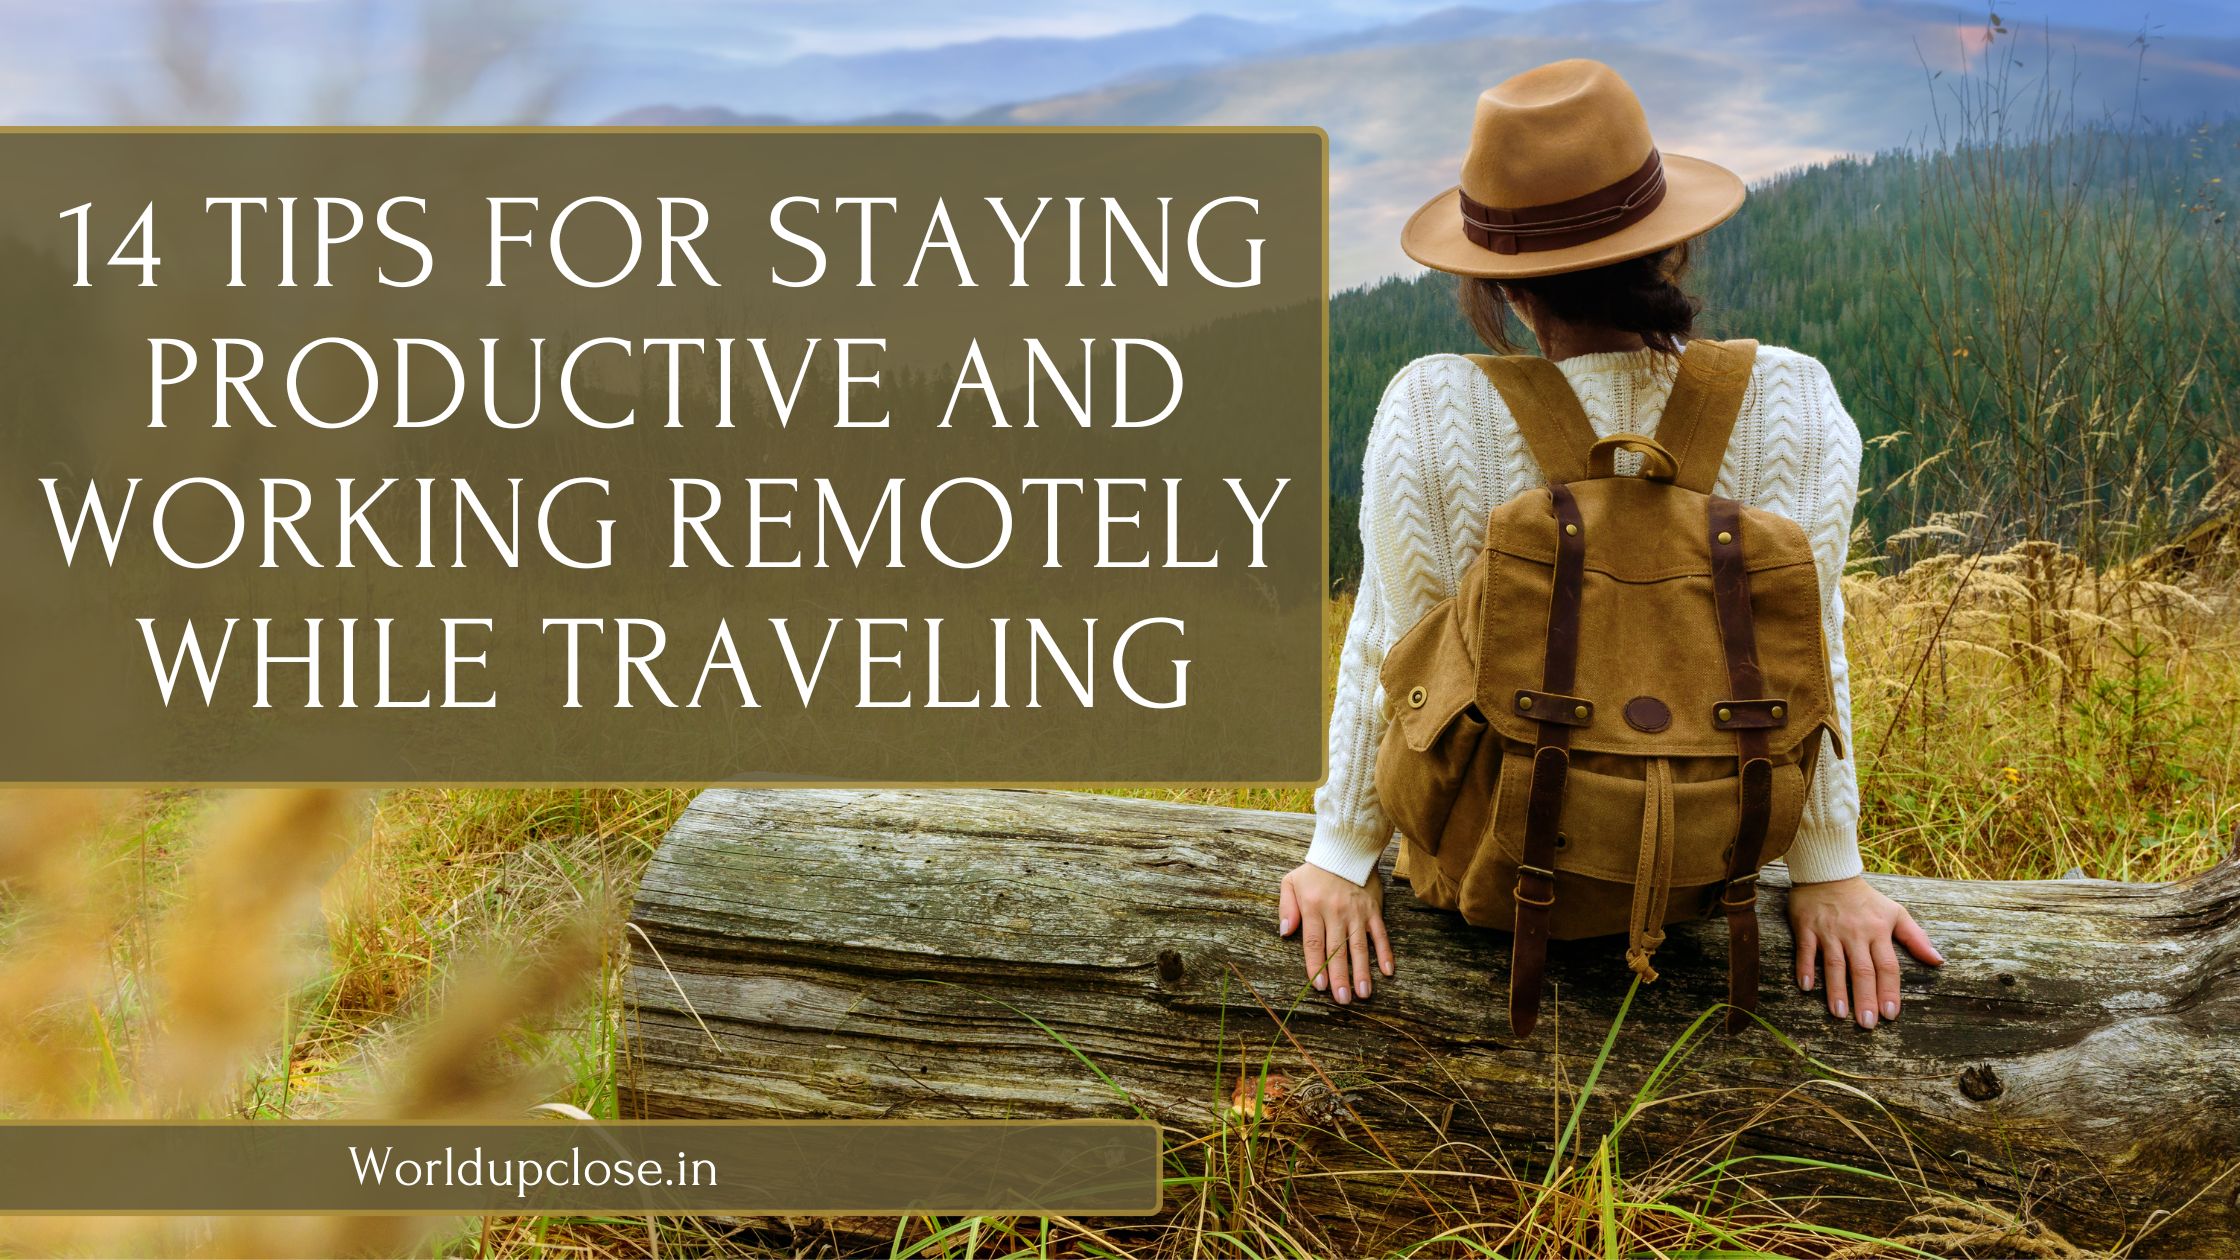 14 Tips for staying productive and working remotely while traveling 1